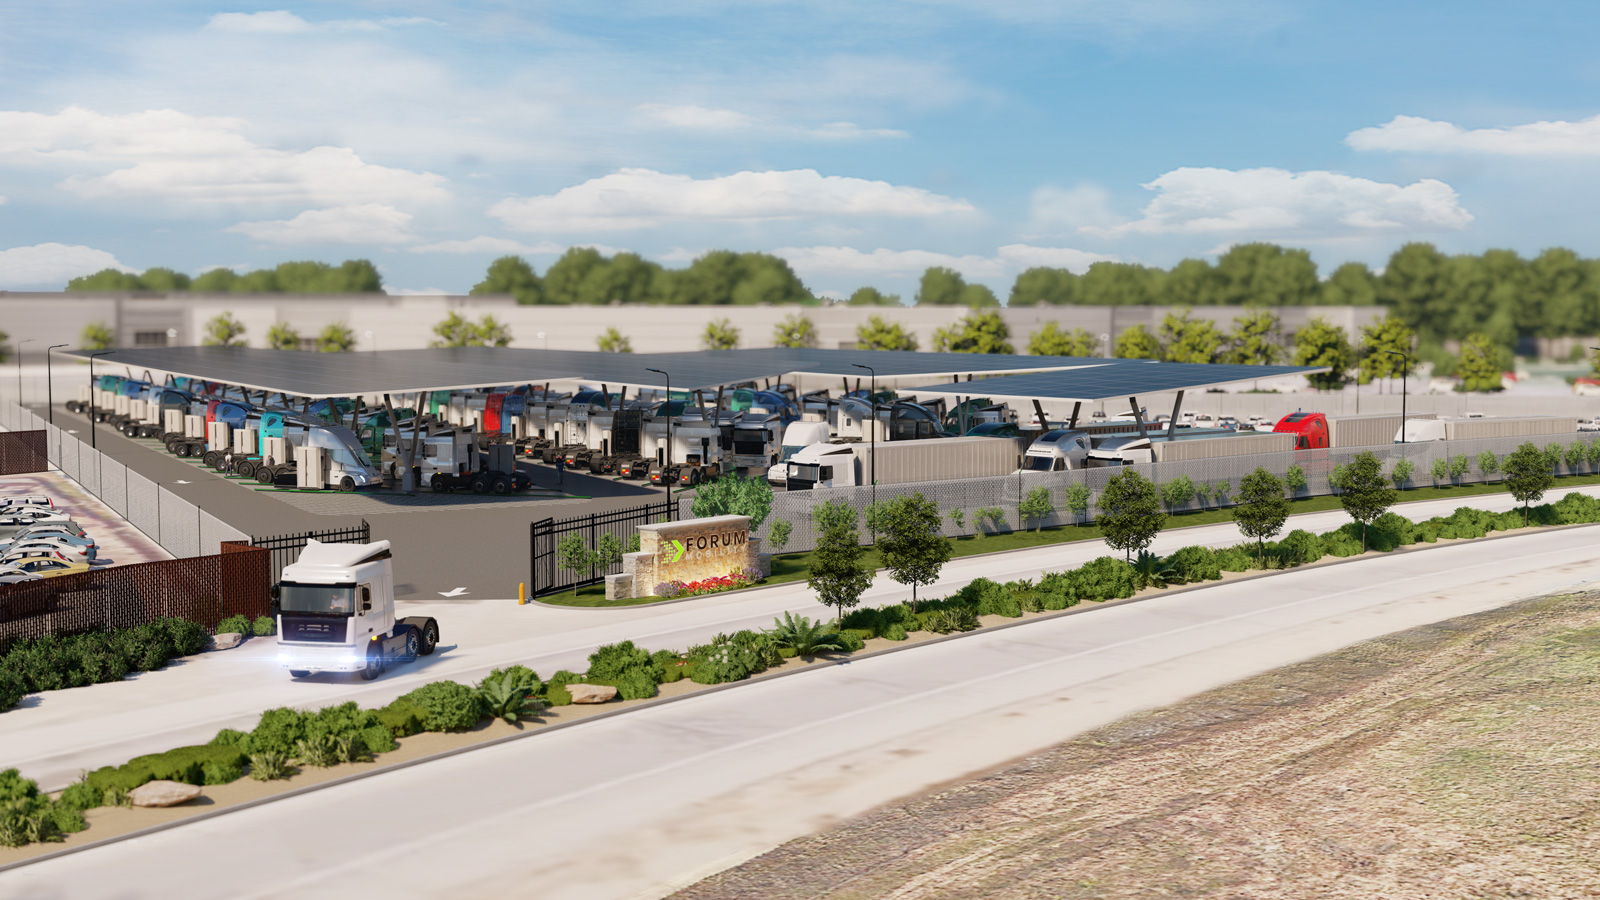 Forum Mobility electric truck depot in Livermore, California